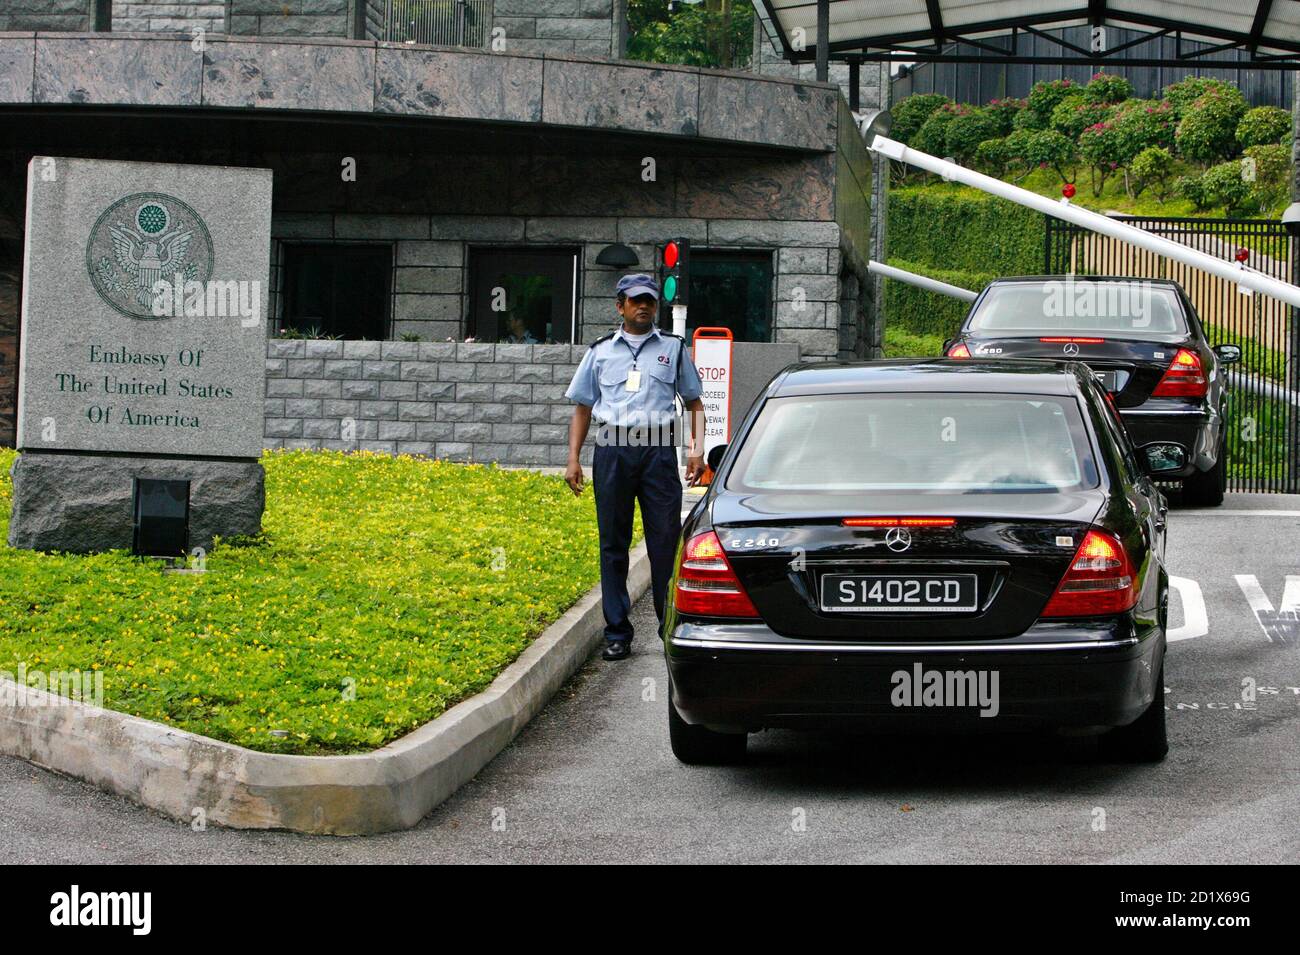 A Car Carrying North Korea S Kim Kye Gwan Lead Car Arrives At The U S Embassy In Singapore April 8 08 The Top U S Nuclear Negotiator Was Meeting His North Korean Counterpart In Singapore